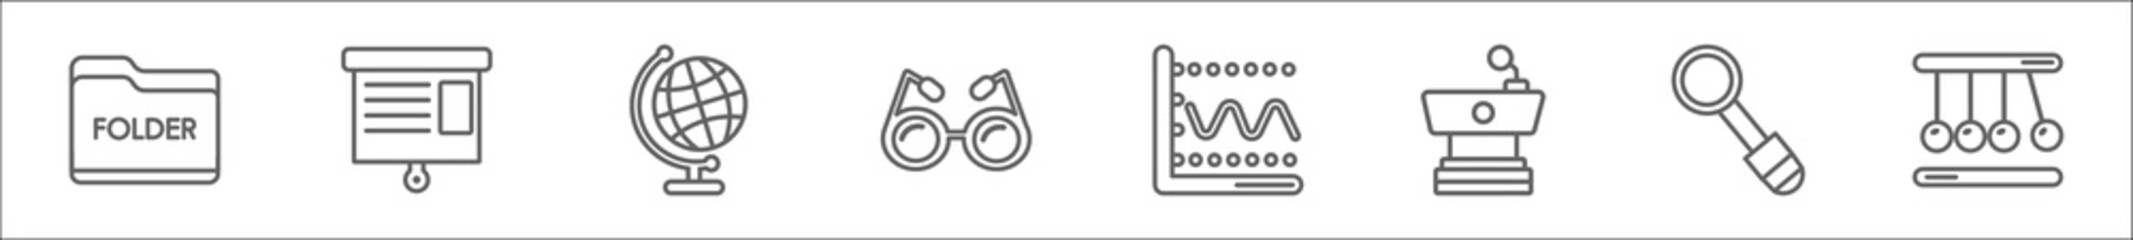 outline set of education line icons. linear vector icons such as black folder, flip chart, classroom globe, studying glasses, sinusoid, classroom tribune, magnification lens, newton cradle